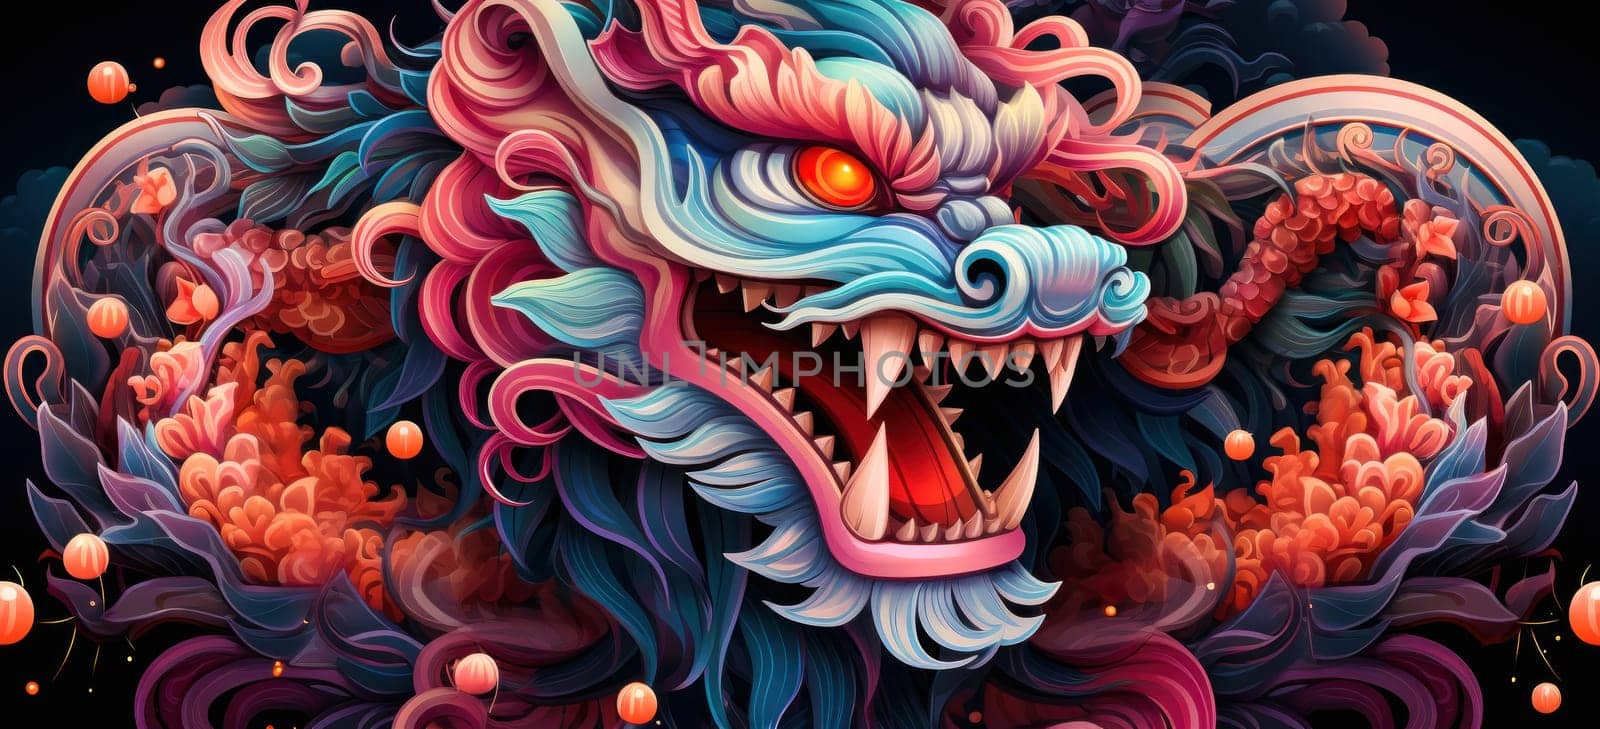 Bright and vibrant dragon illustration in beautiful red and purple tones. This mythical creature art is perfect for wall d cor and adds a charming element to any space.